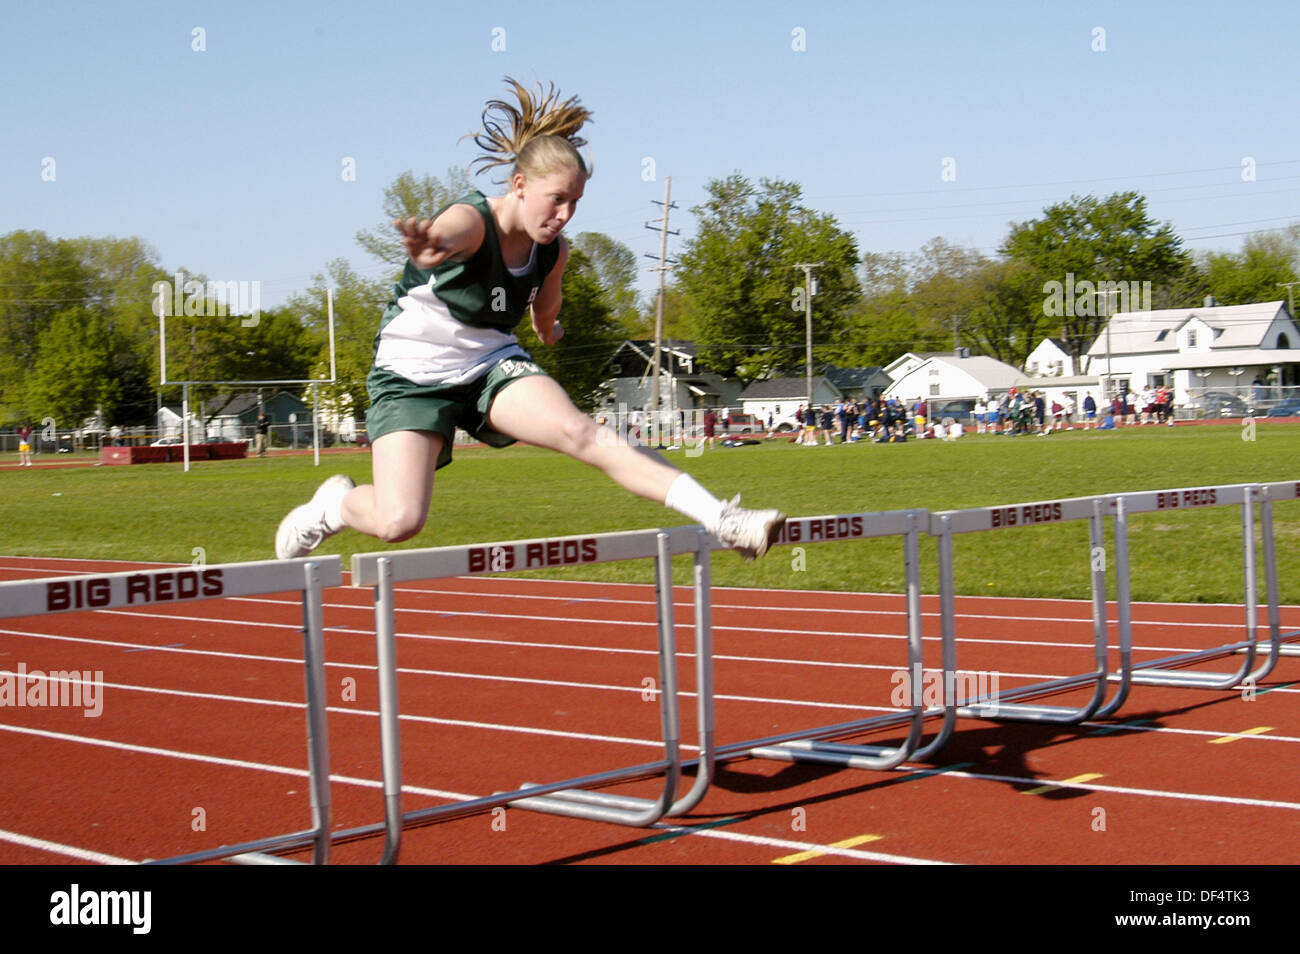 Middle School track meet events Stock Photo Alamy